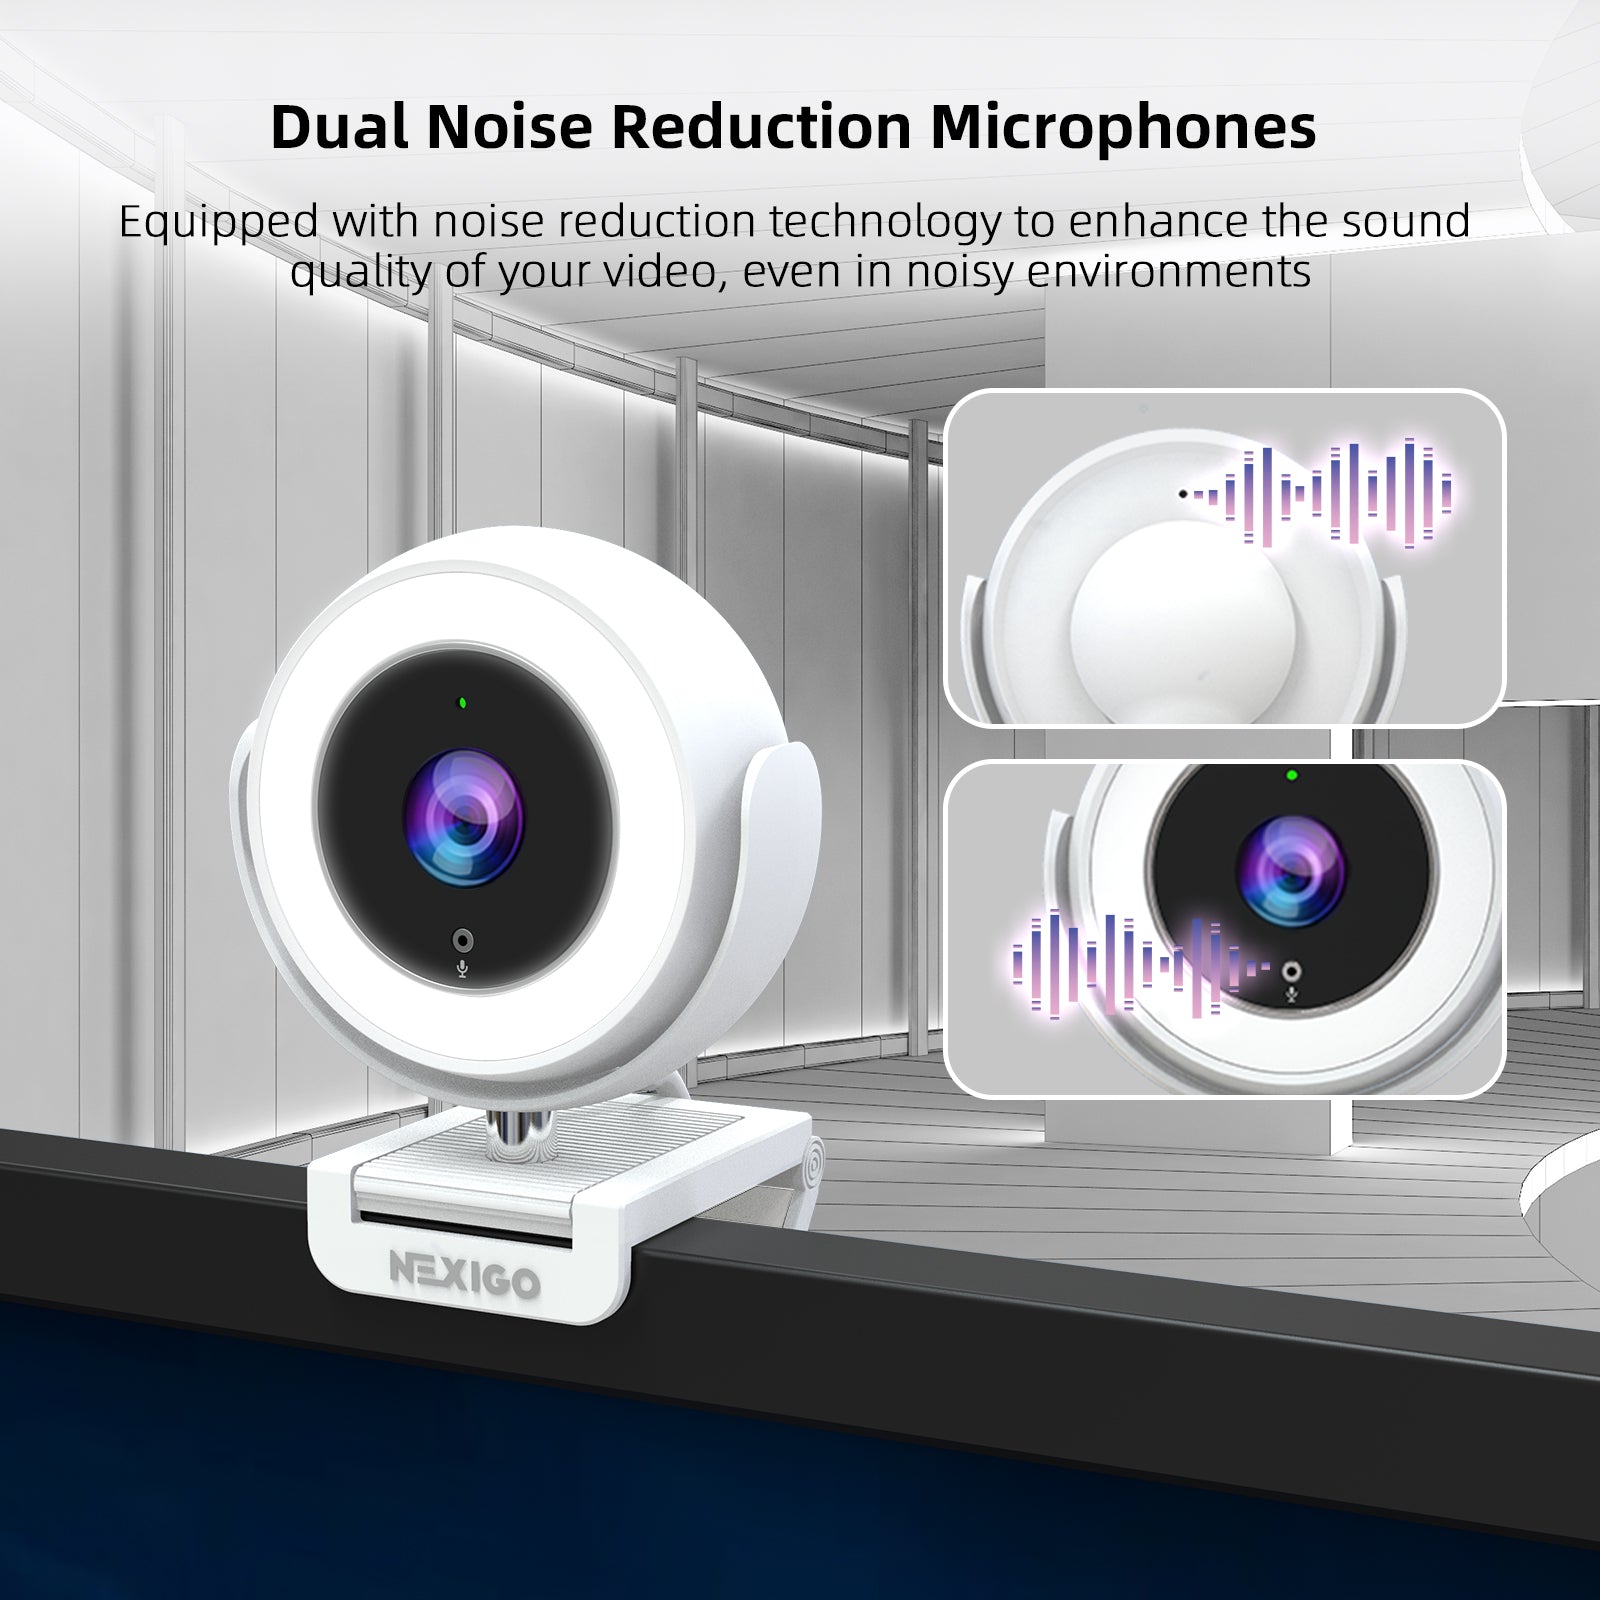 The webcam has built-in dual noise-canceling microphones, one front and one rear